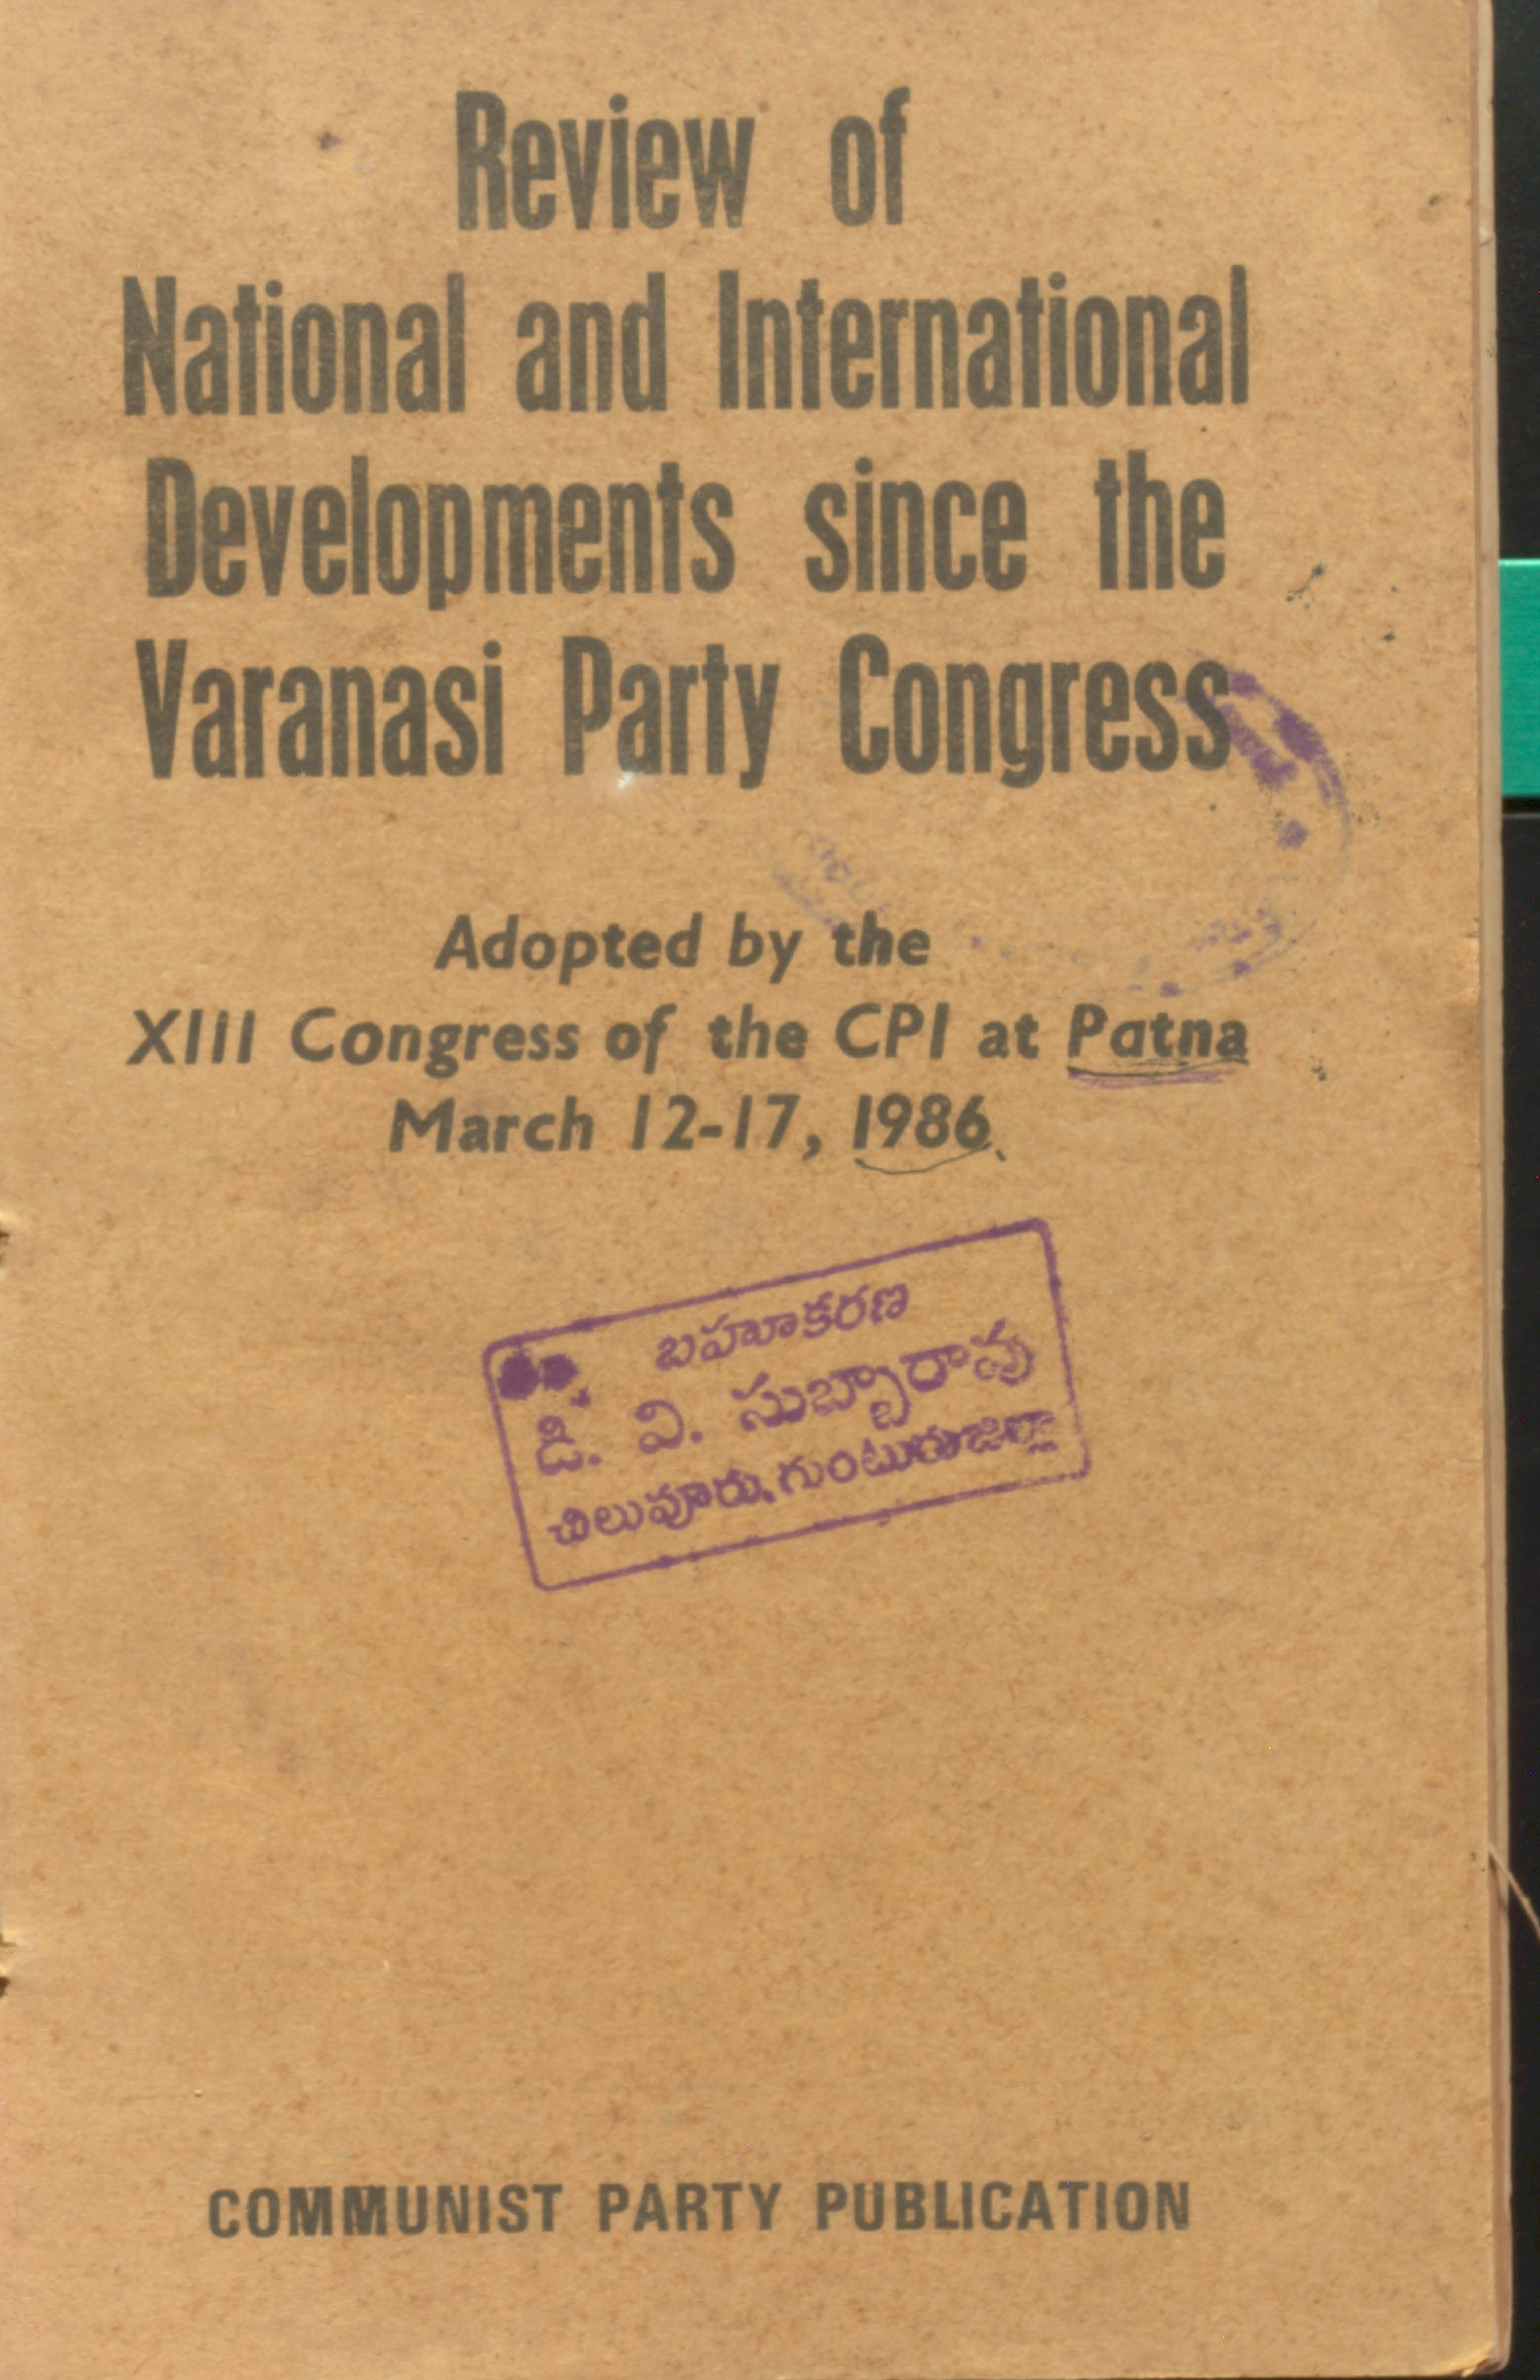 Review of national and international developments since the varanasi party congress (march 12-17, 1986)